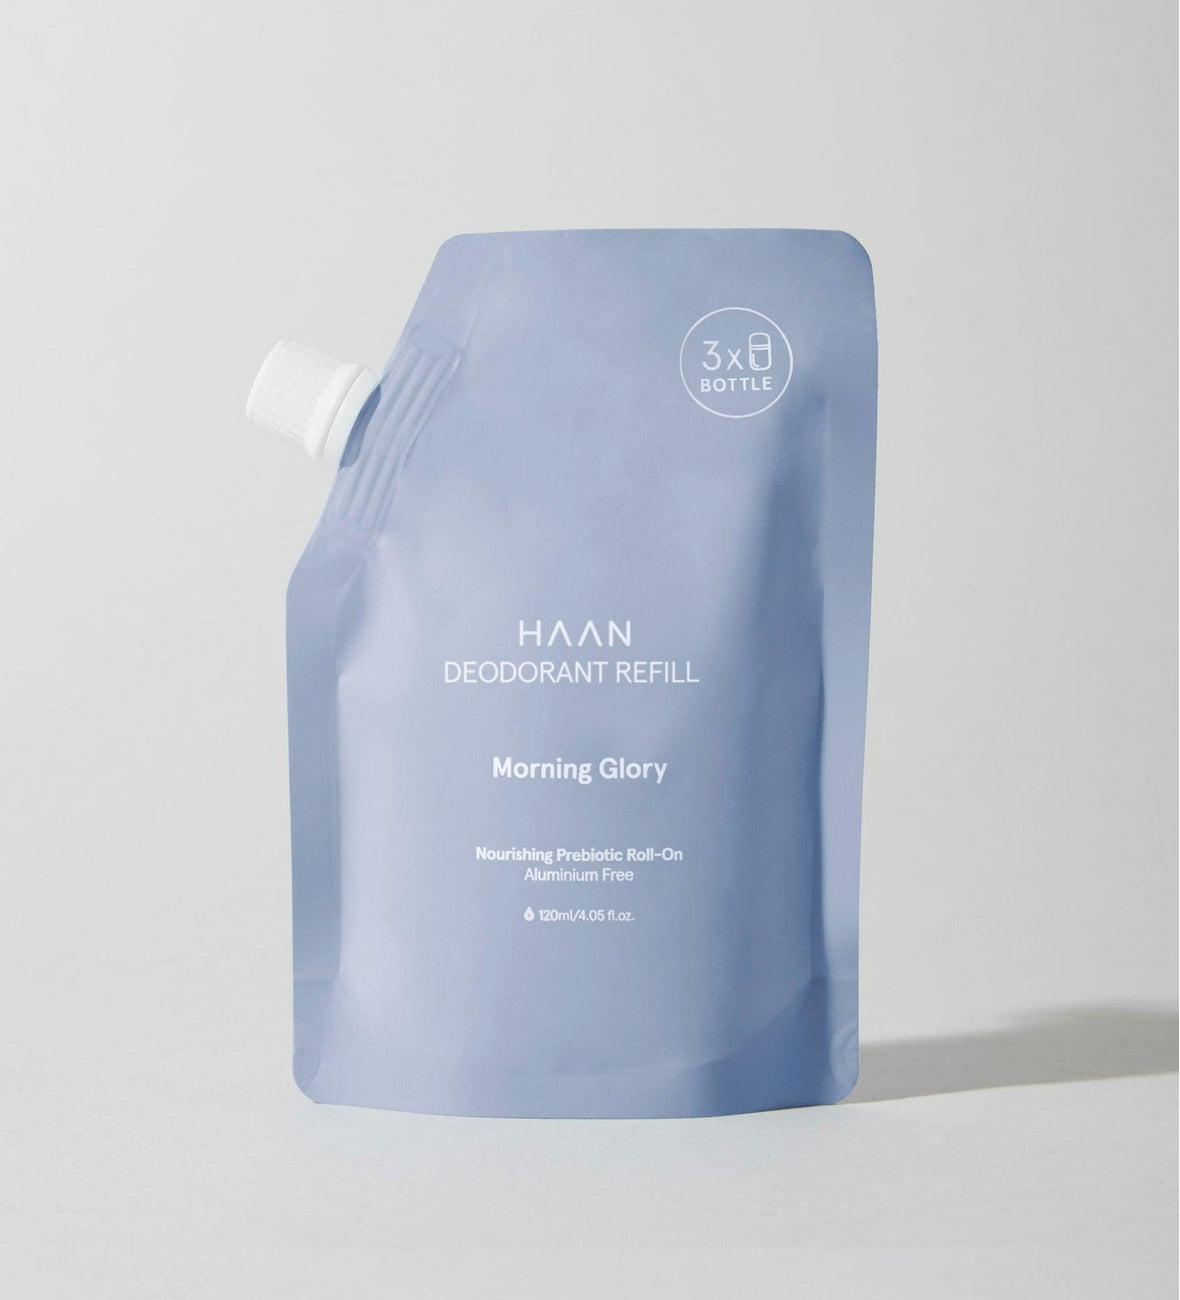 HAAN DEO REFILL | Morning Glory